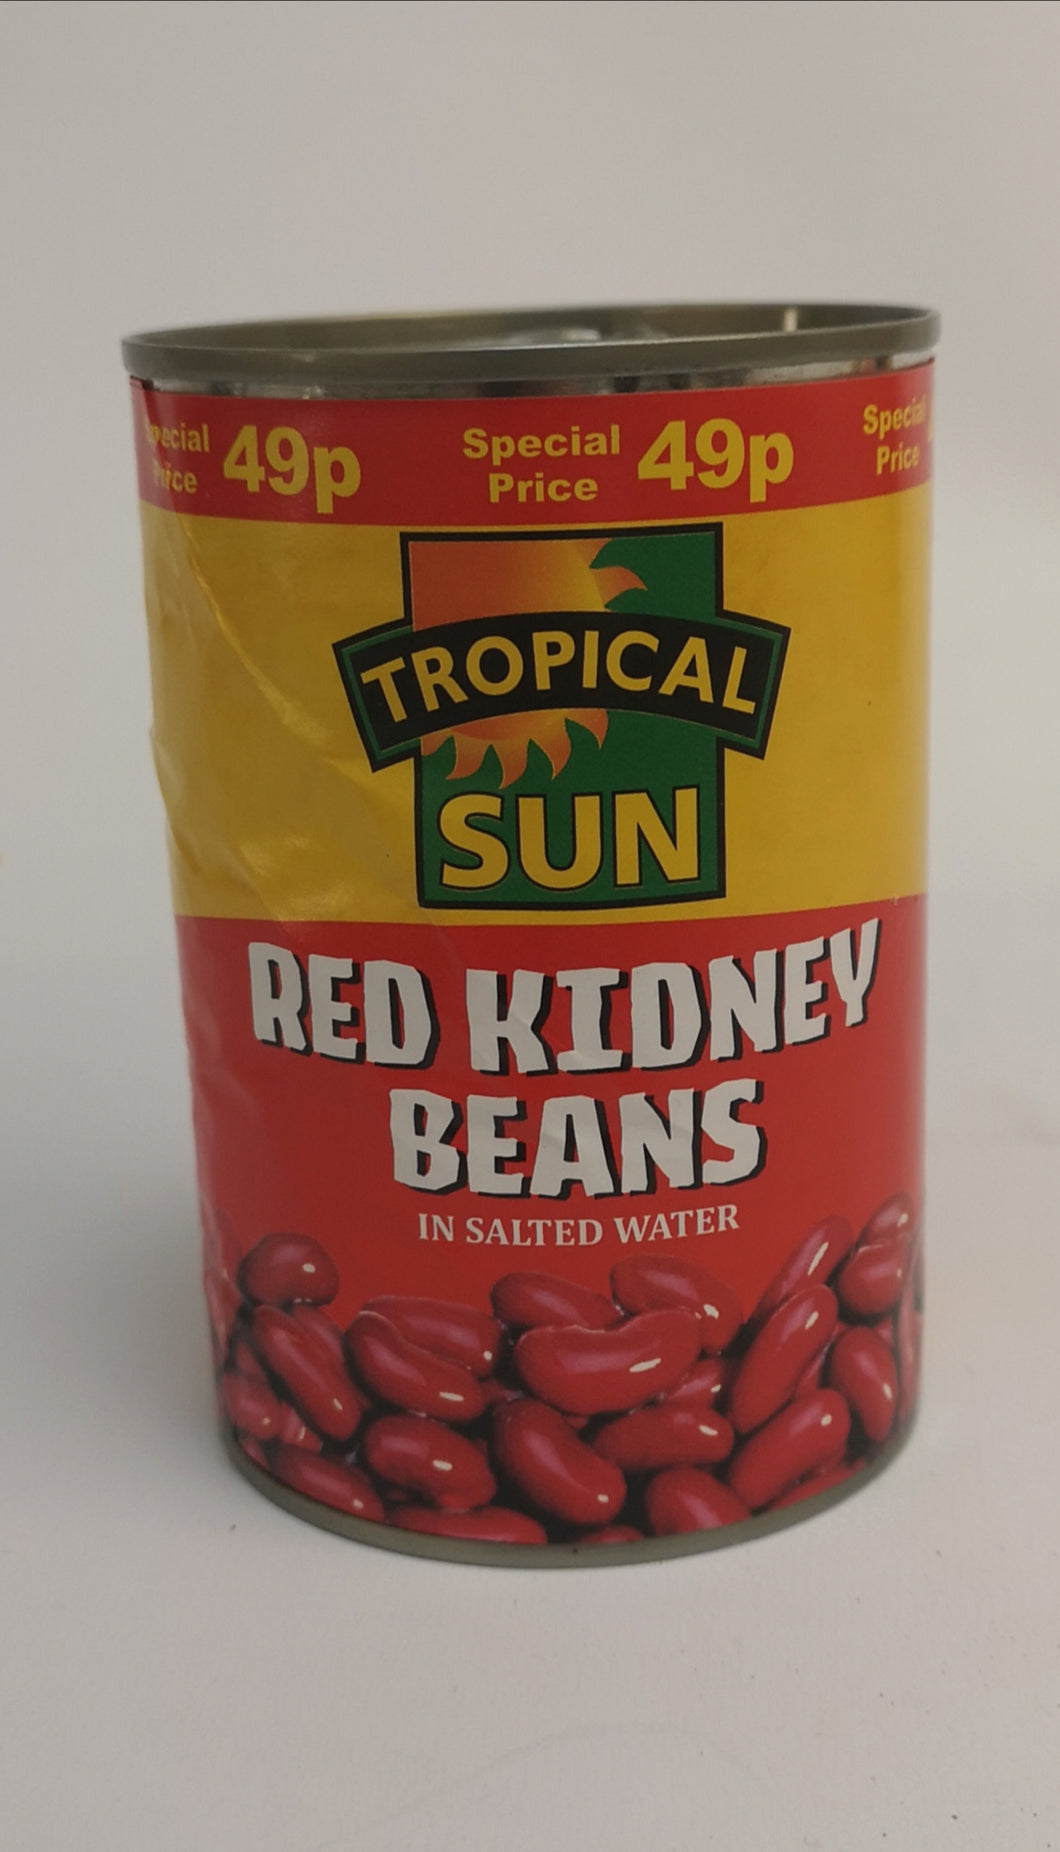 Tropical Sun Red Kidney Beans in Salted Water